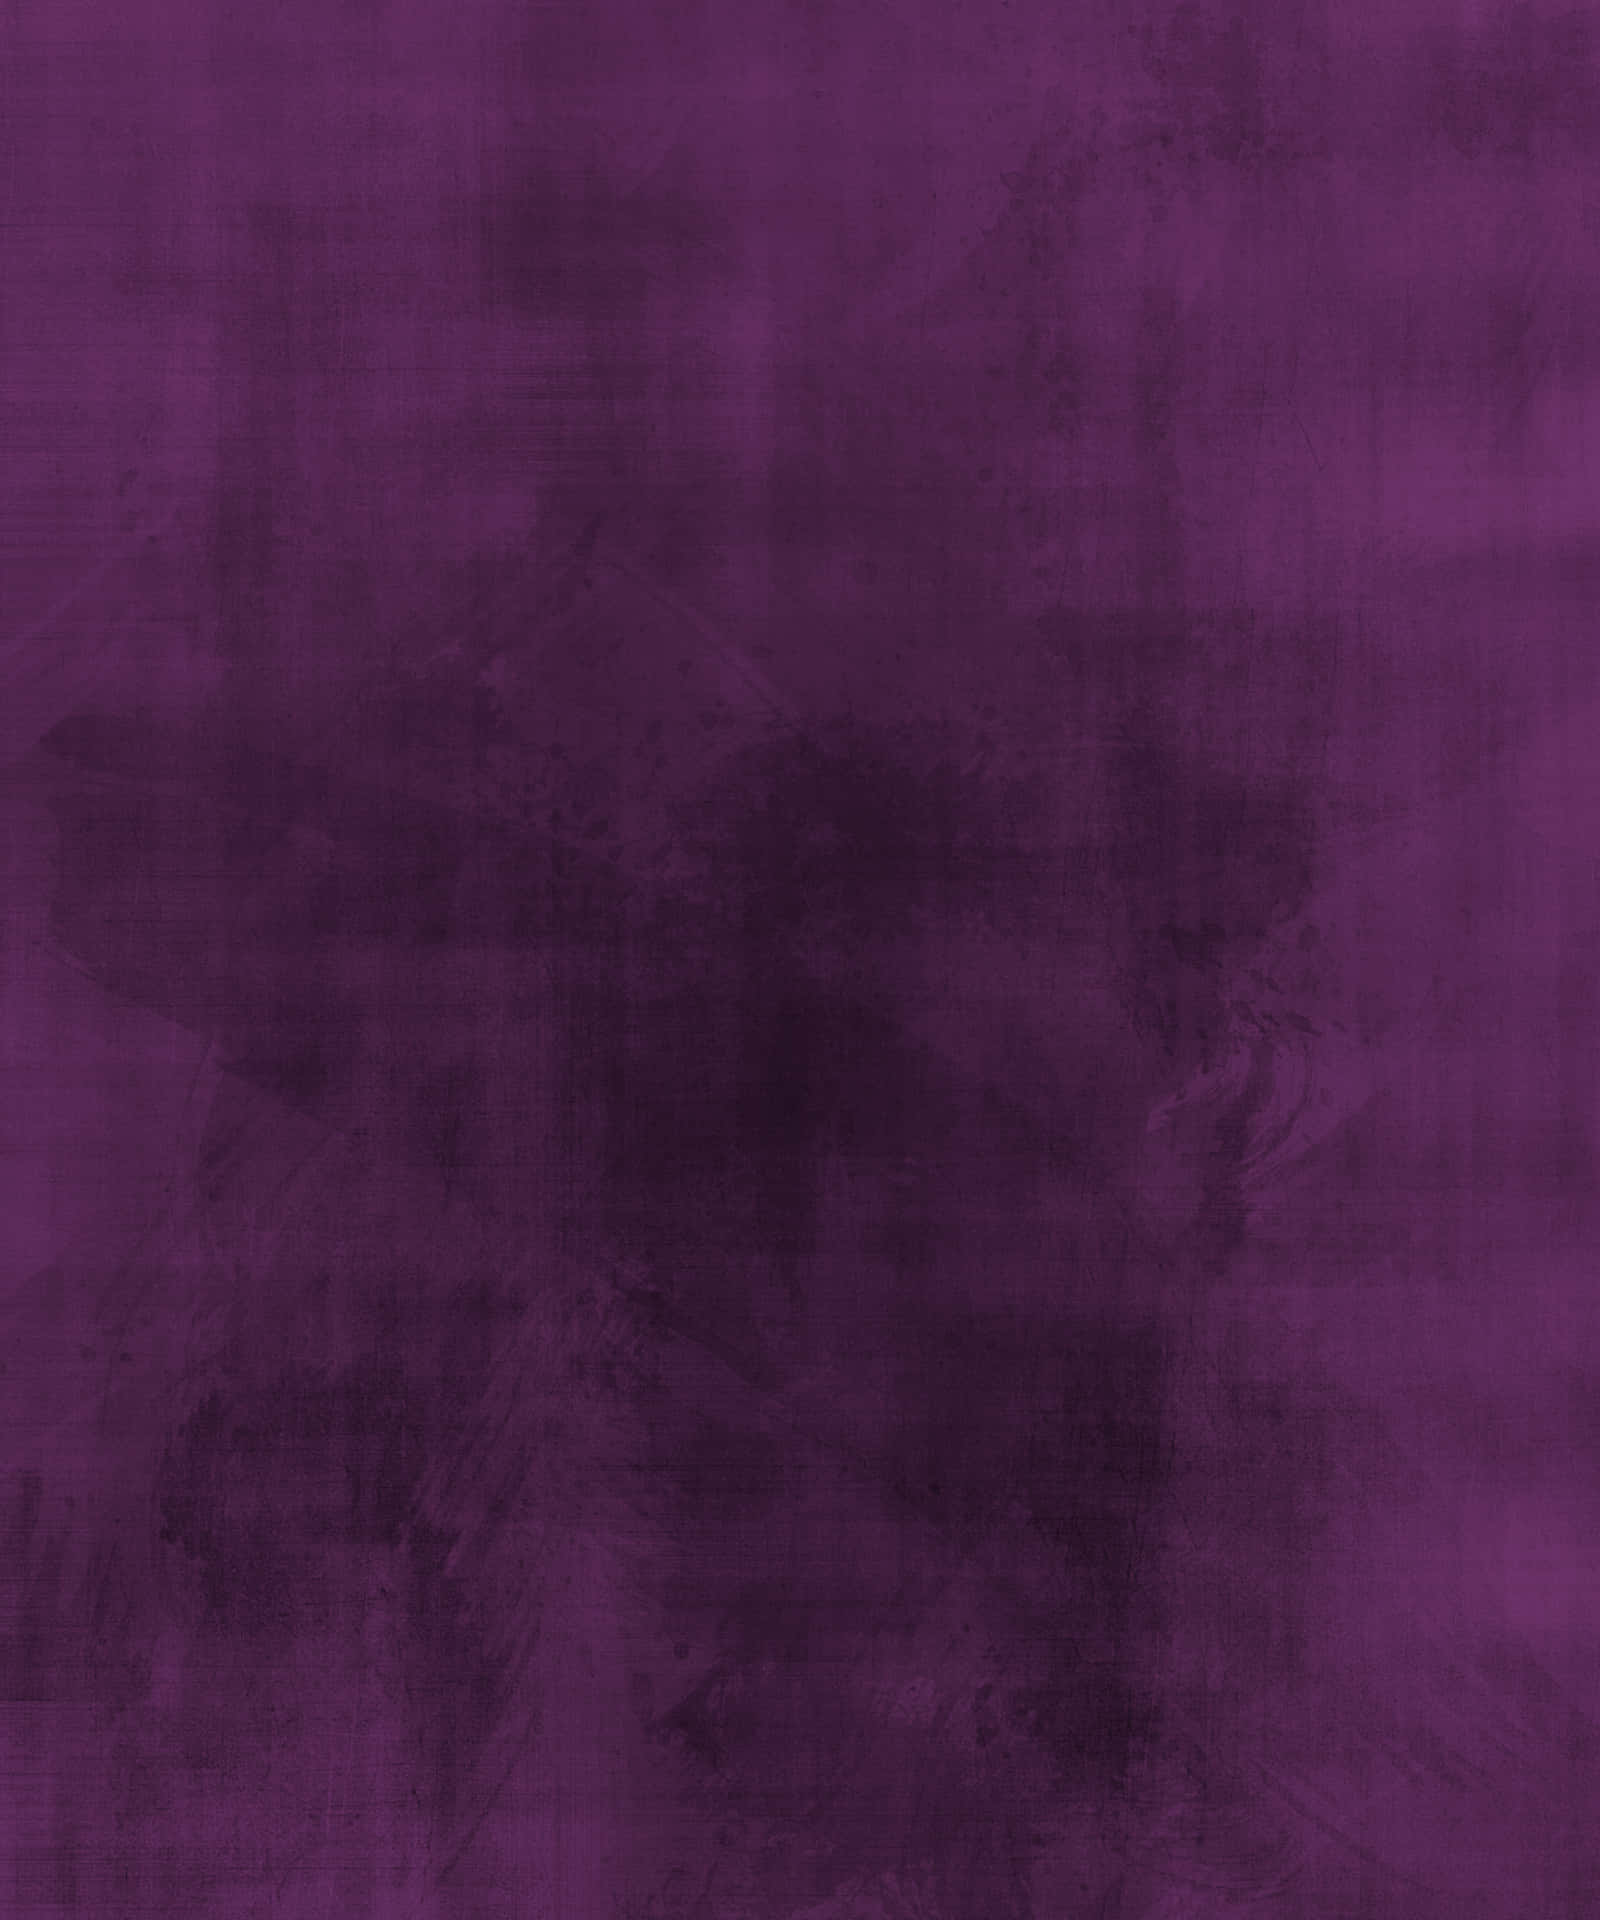 Bold and Edgy Purple Textured Background